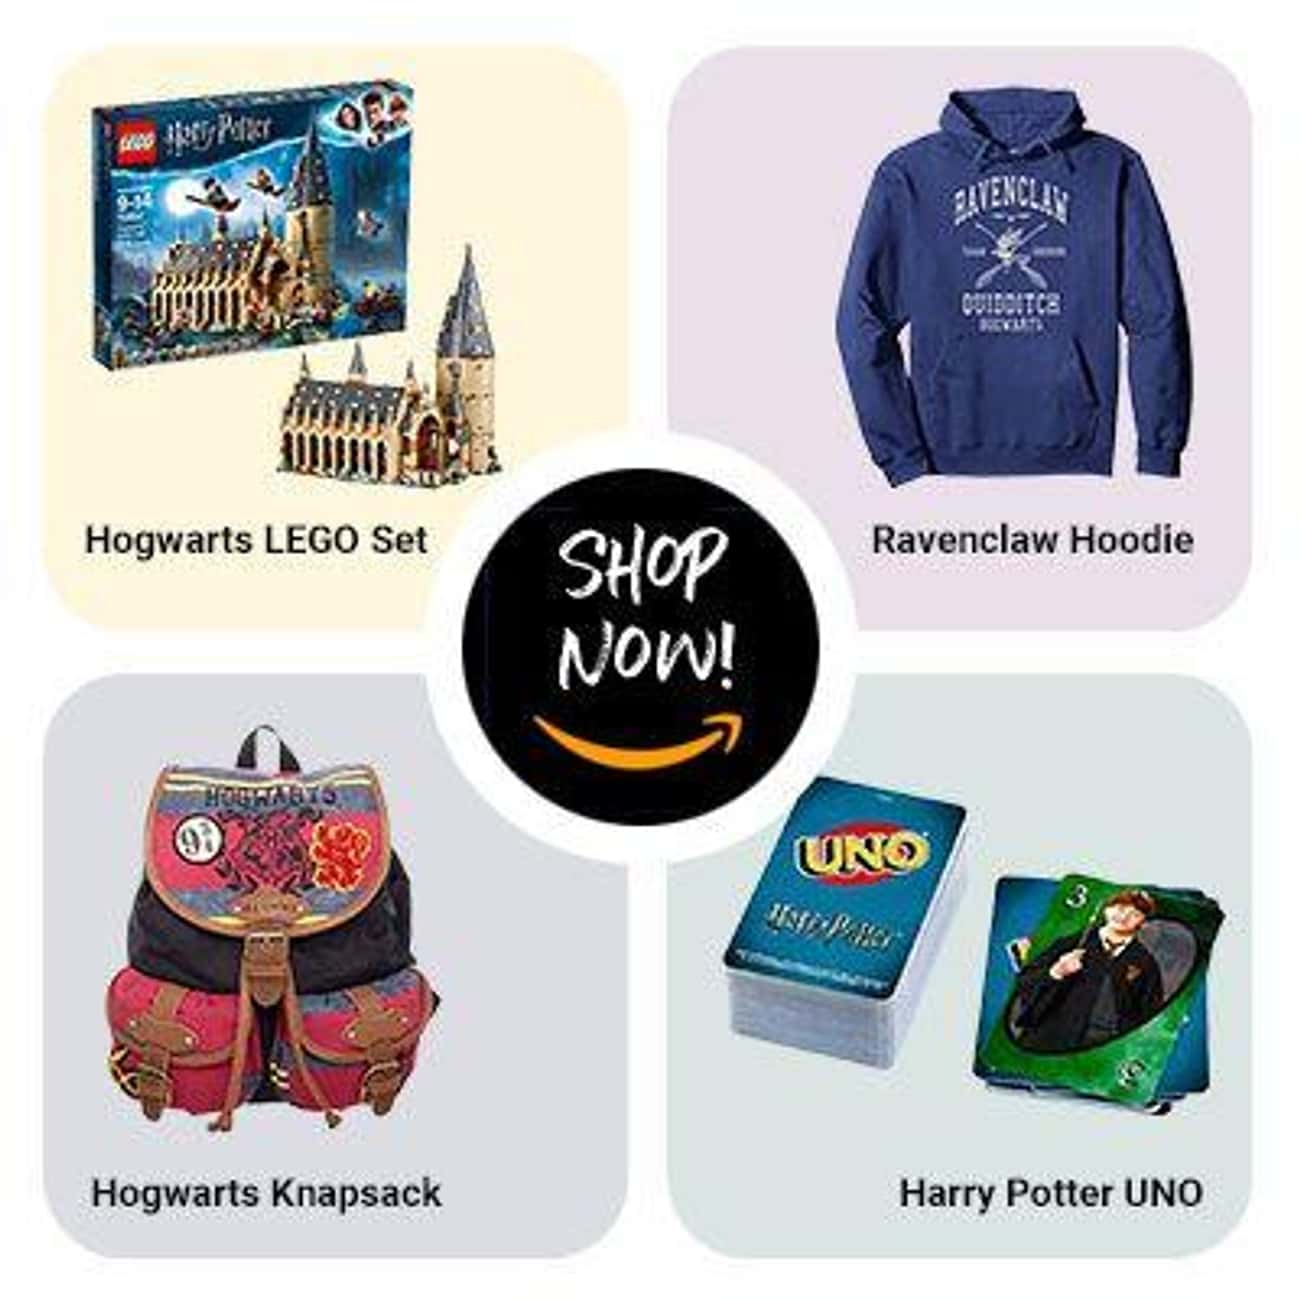 Need More Harry Potter In Your Life?